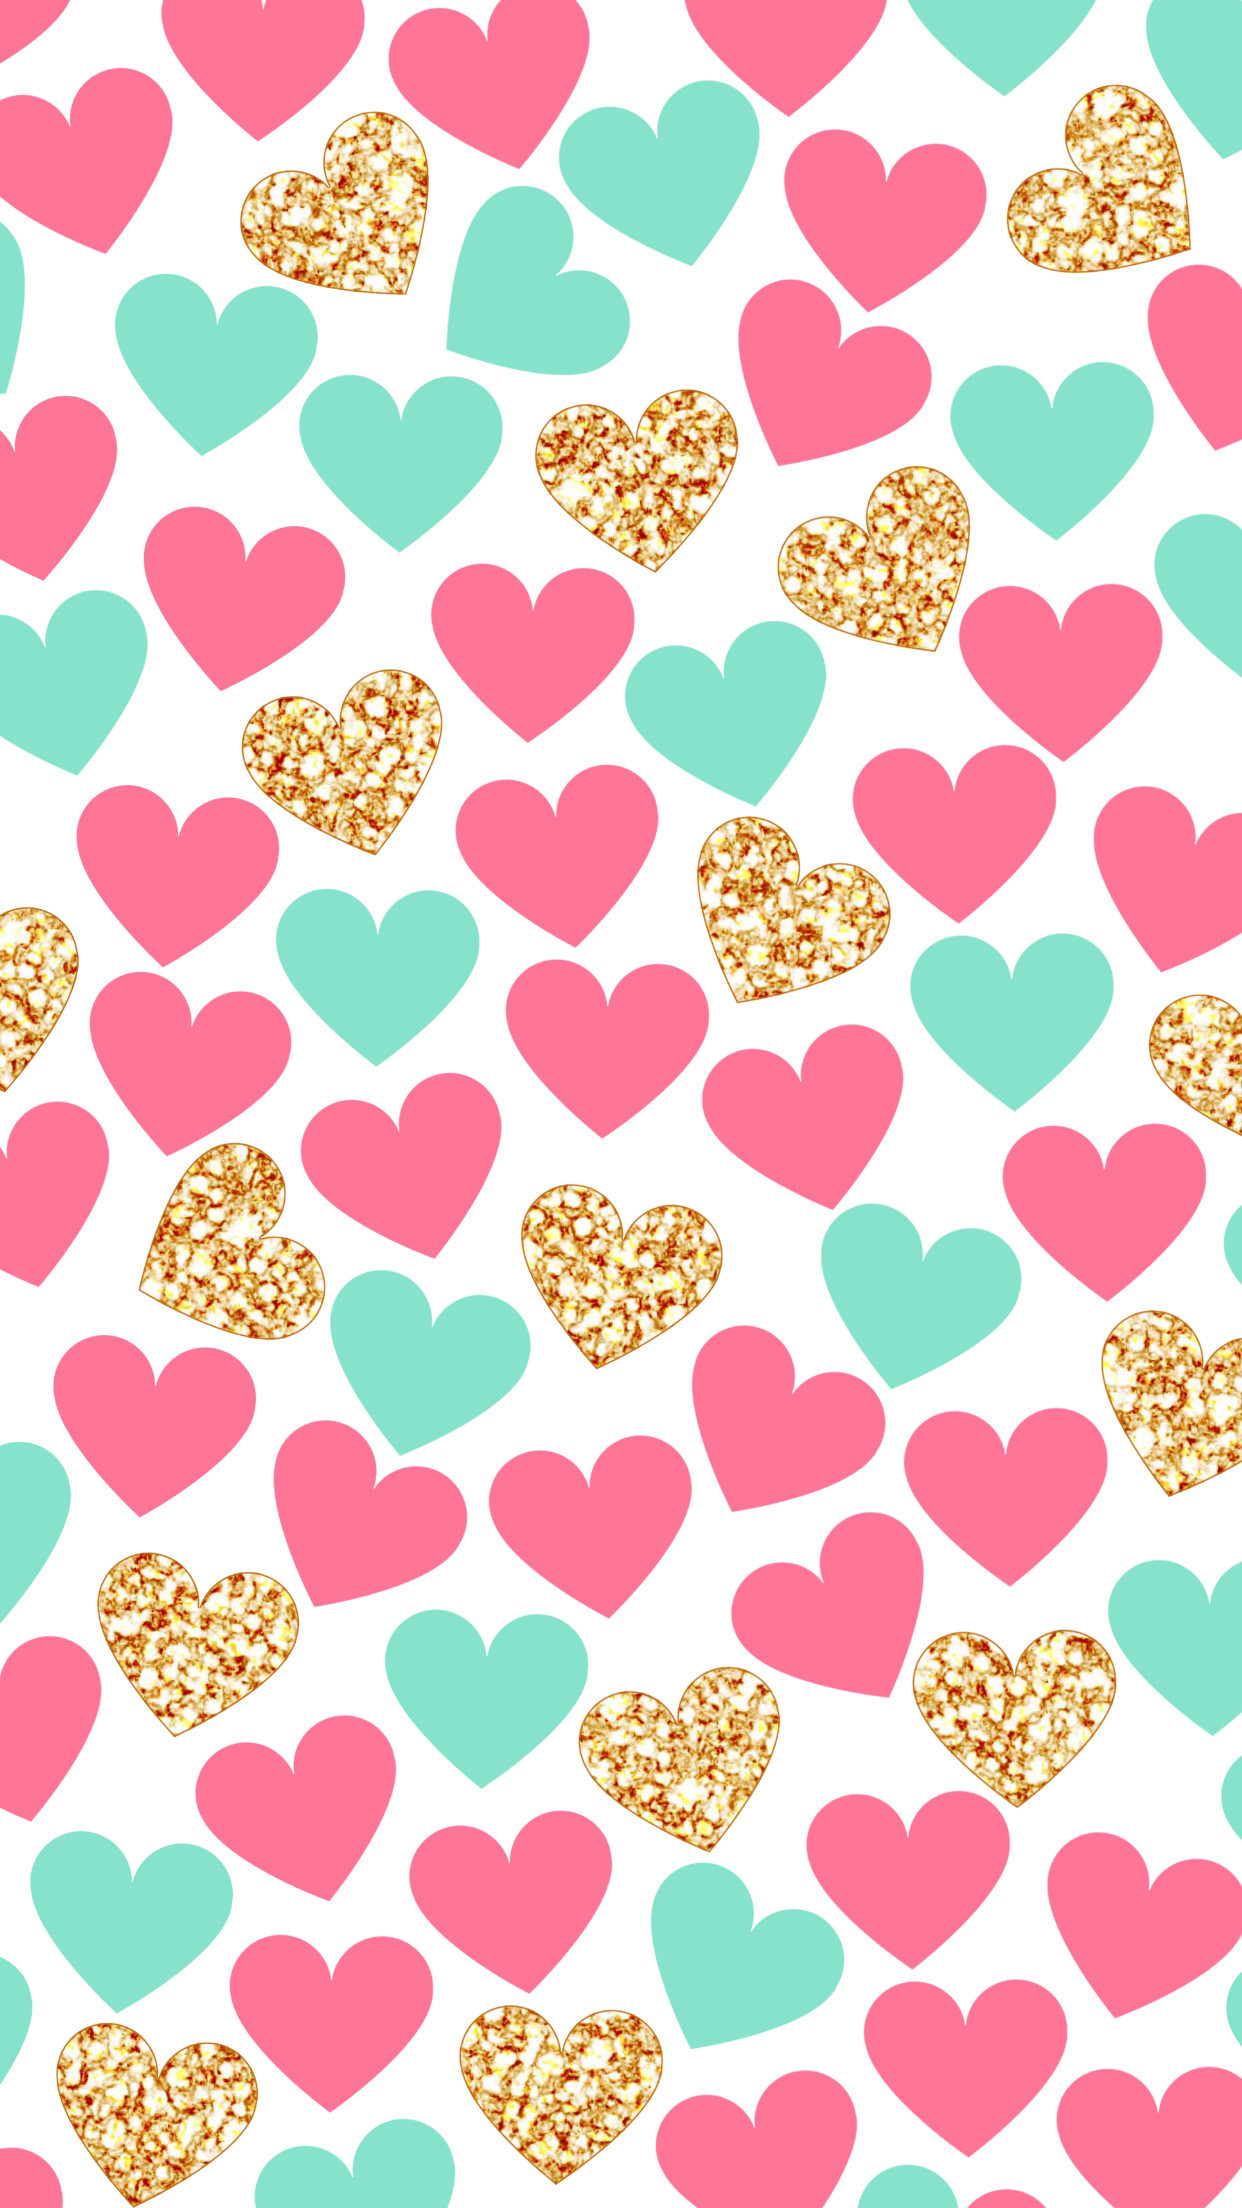 Cute heart wallpaper pictures